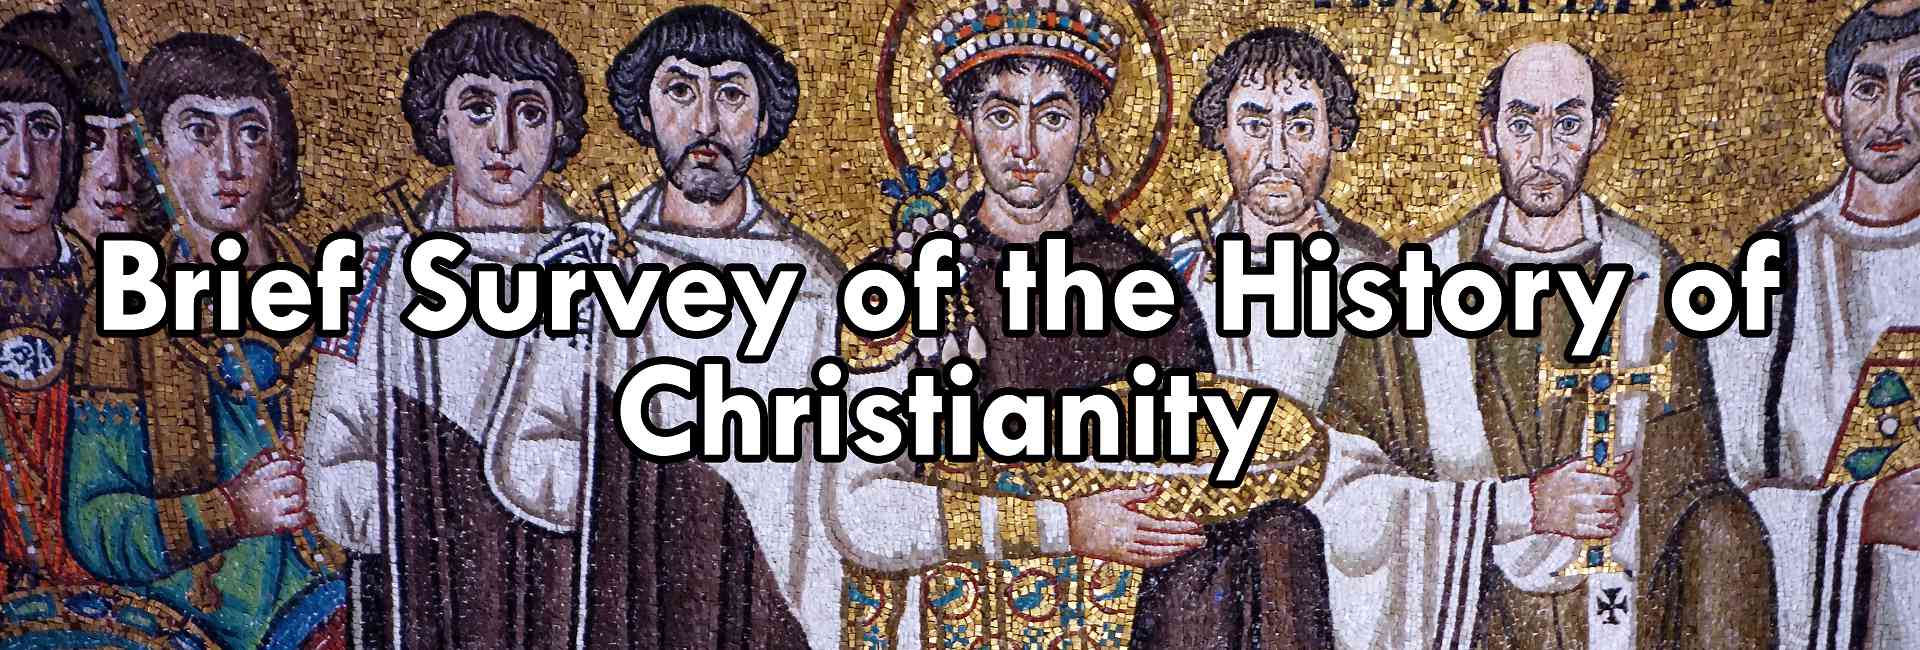 Brief Survey of the History of Christianity, A